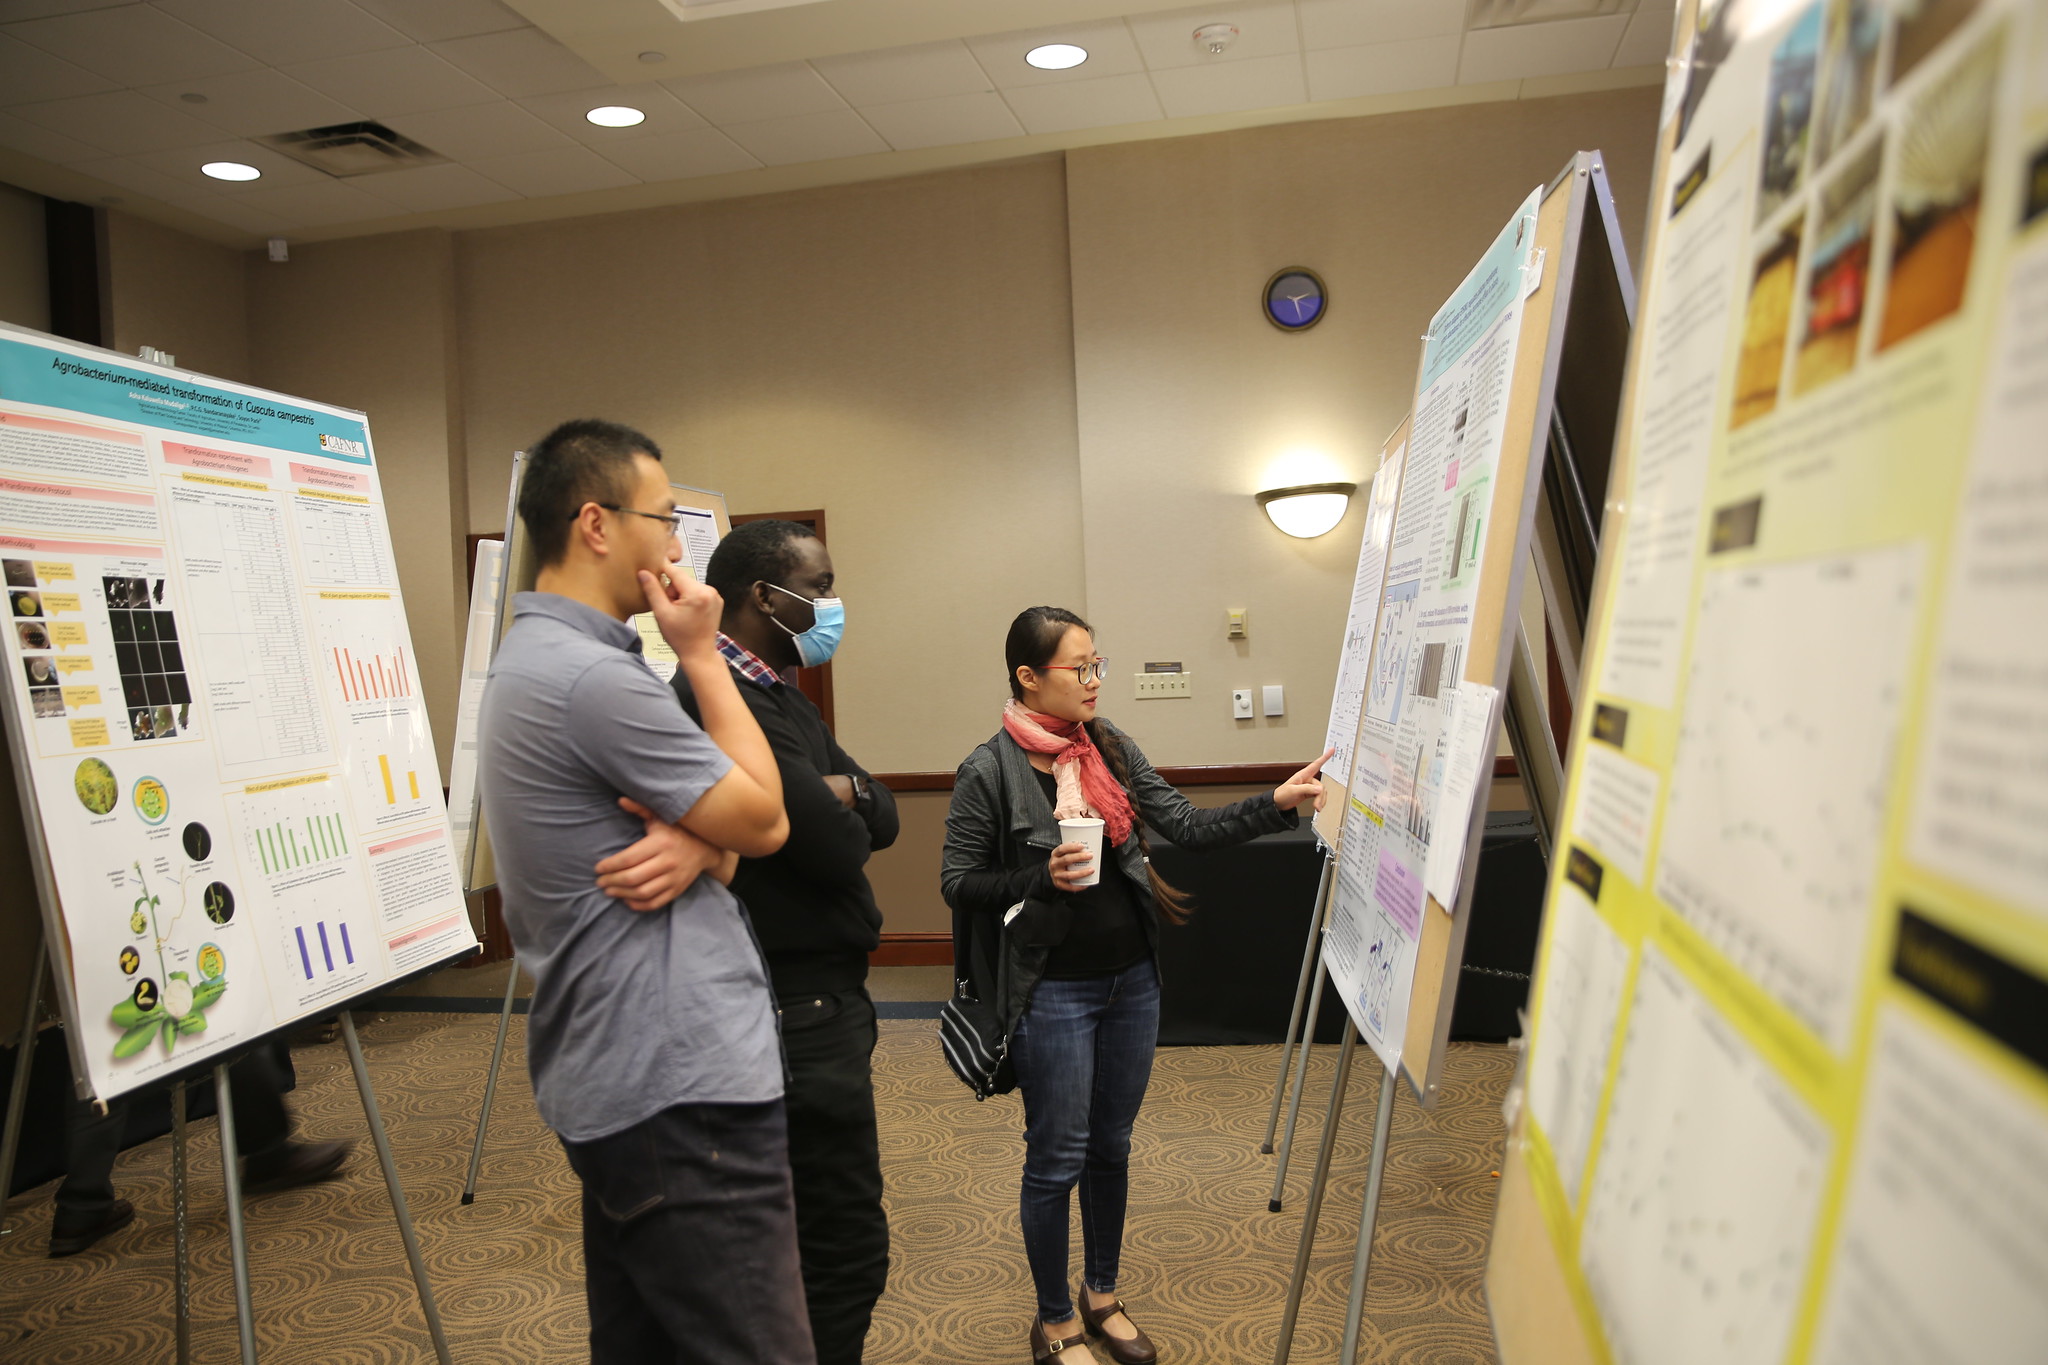 Check out our Flickr album from the CAFNR Research Symposium (click to read)